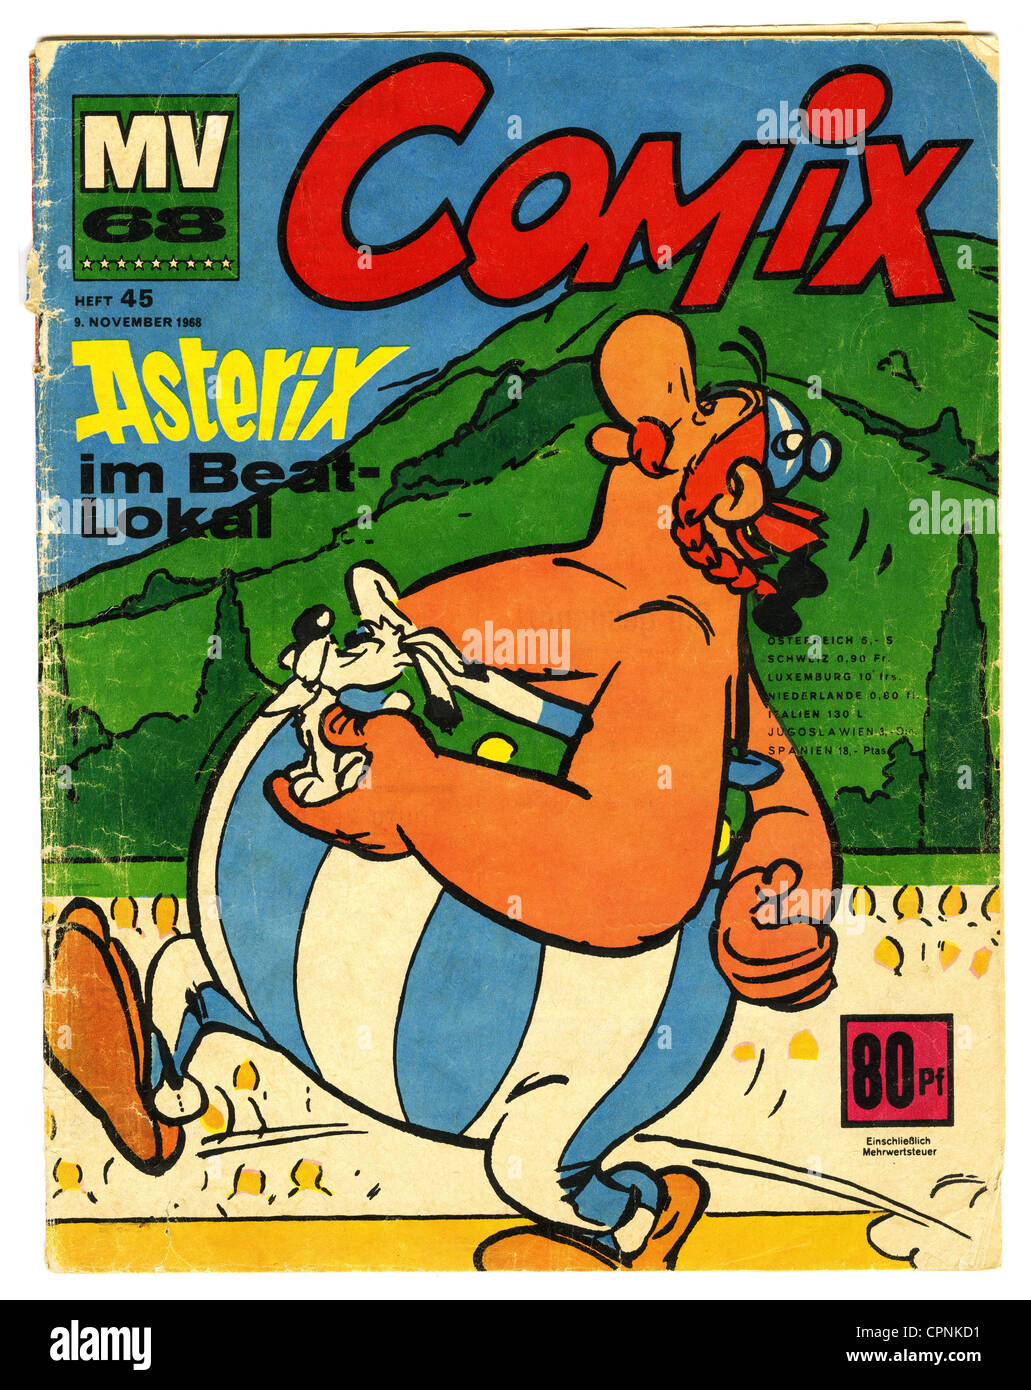 literature, comics, 'Asterix im Beat-Lokal' (Asterix at the Beat Club), one of the first German Asterix publications, cover picture, Obelix and Idefix, comic book, MV 68 Comix, published by the Ehapa publishing house, Stuttgart, Germany, 1968, Additional-Rights-Clearences-Not Available Stock Photo